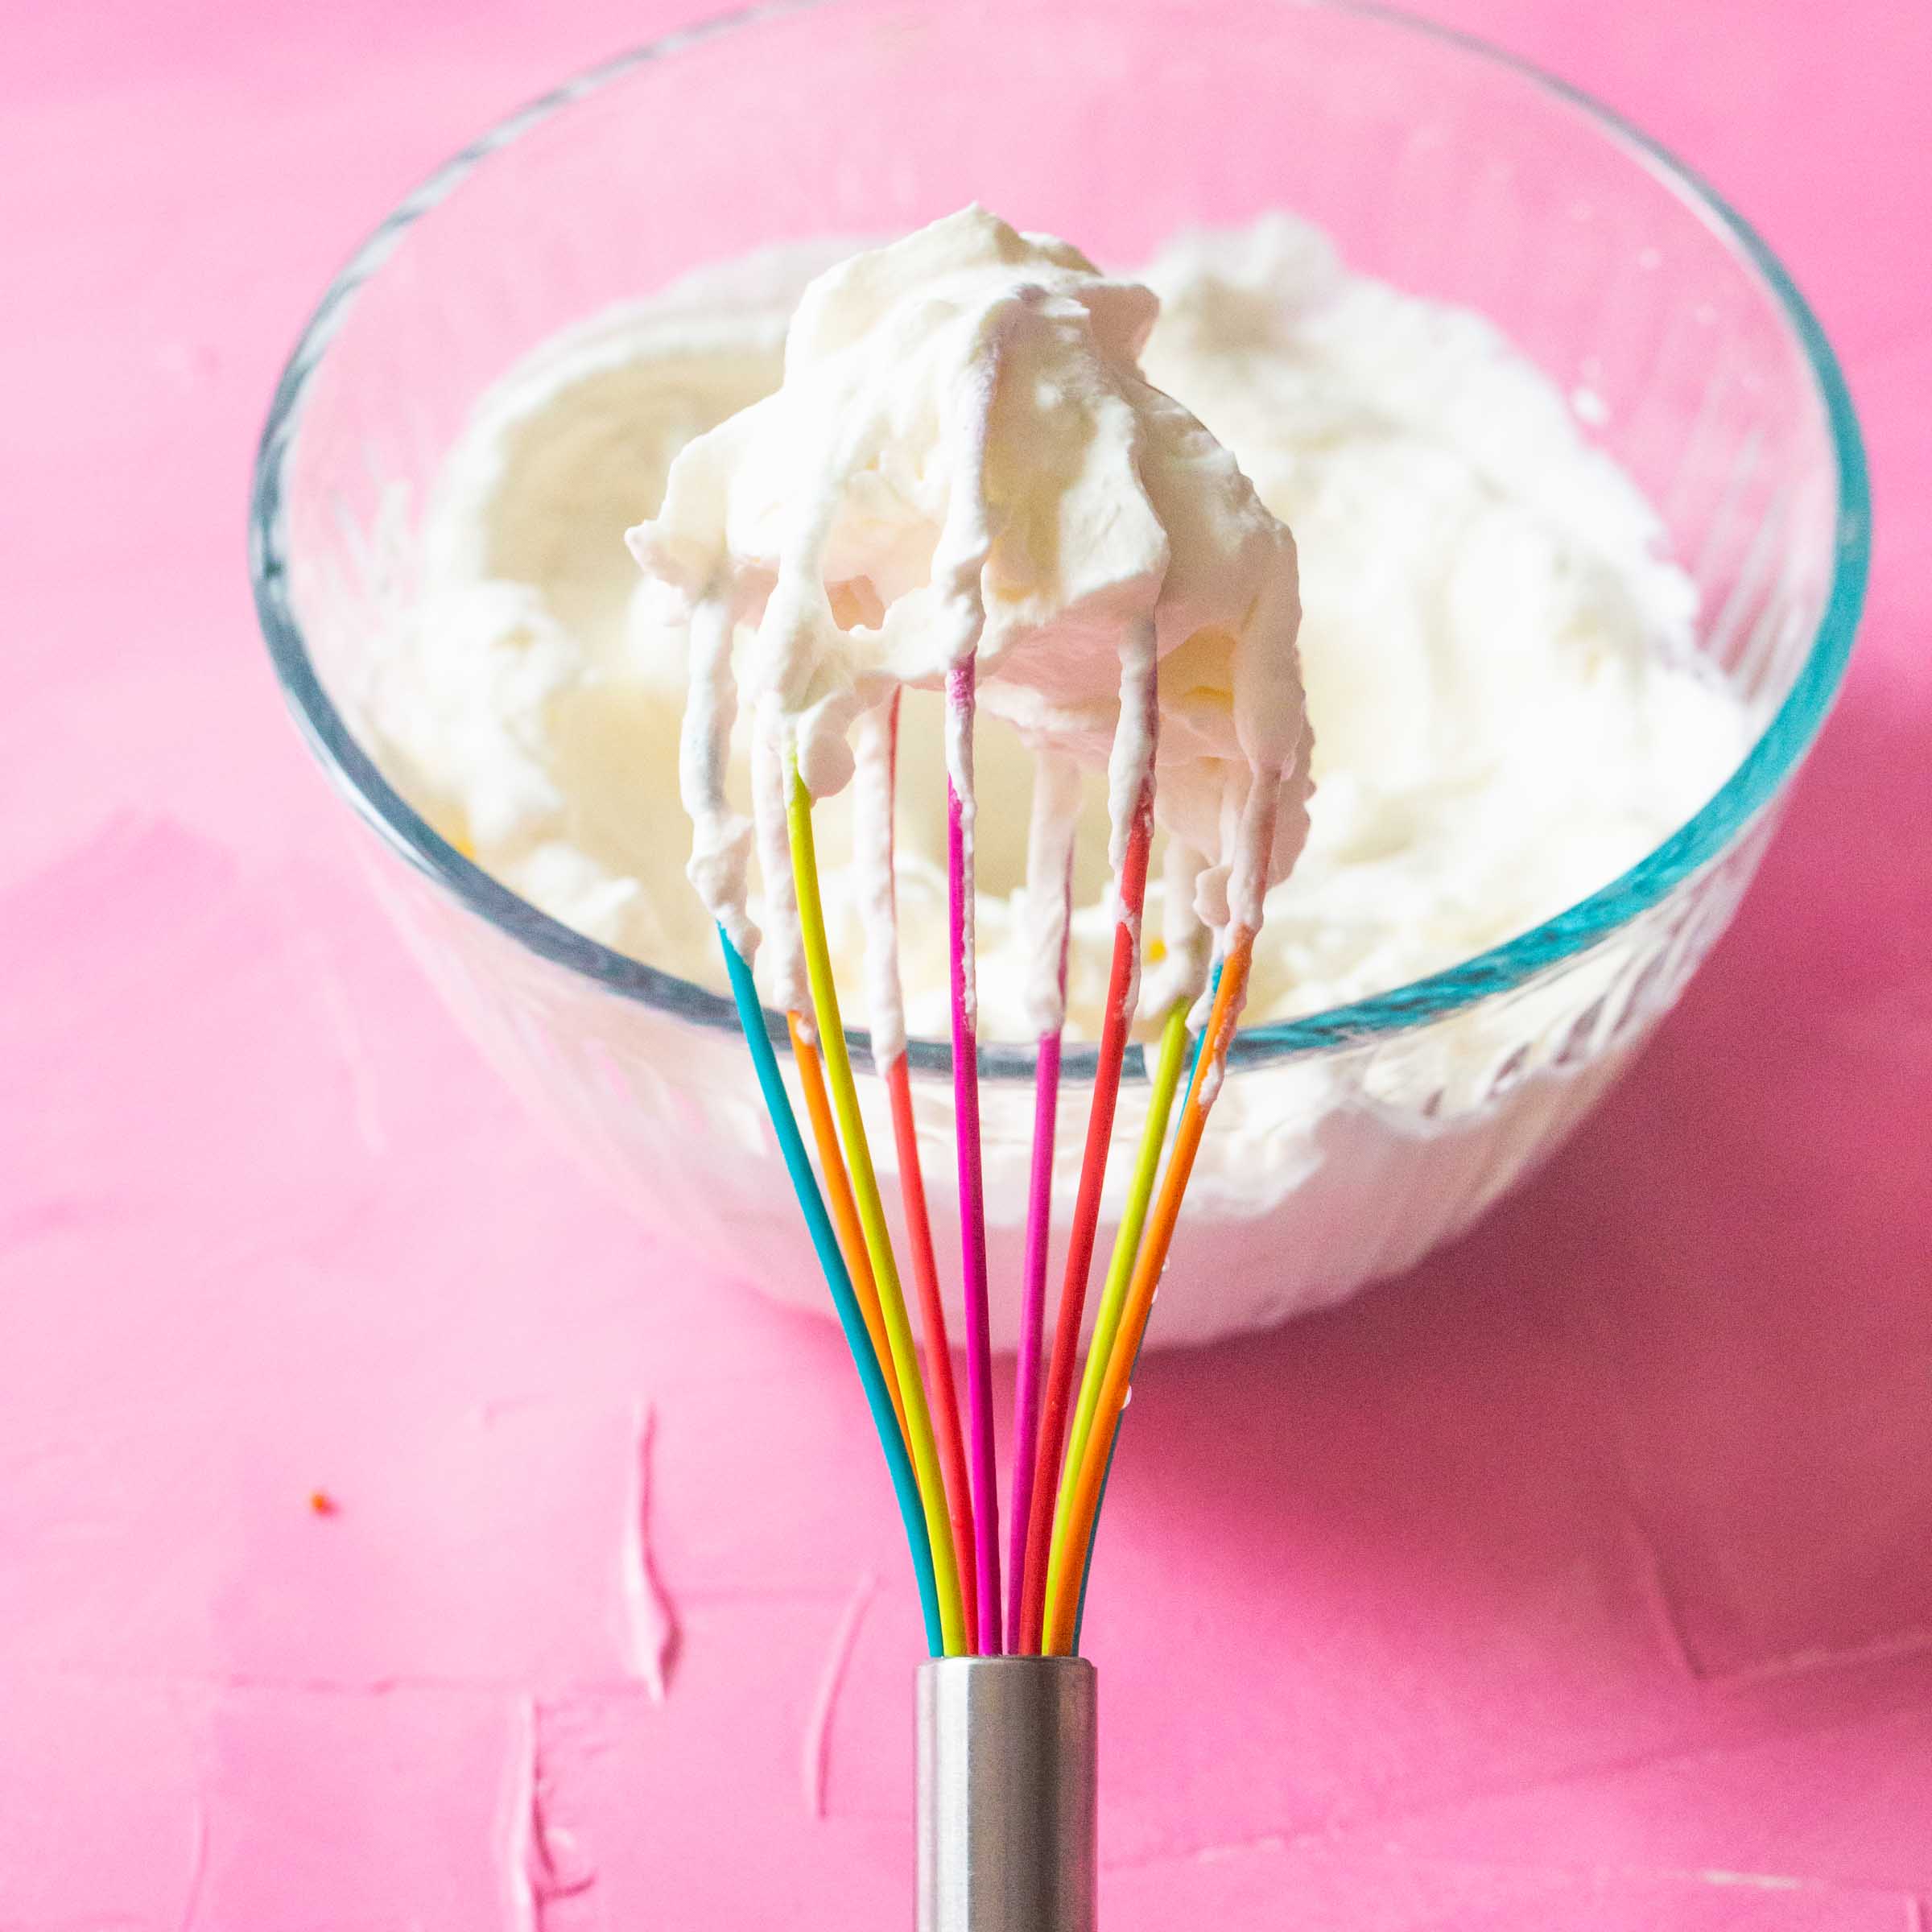 A whisk is whipping up cream.